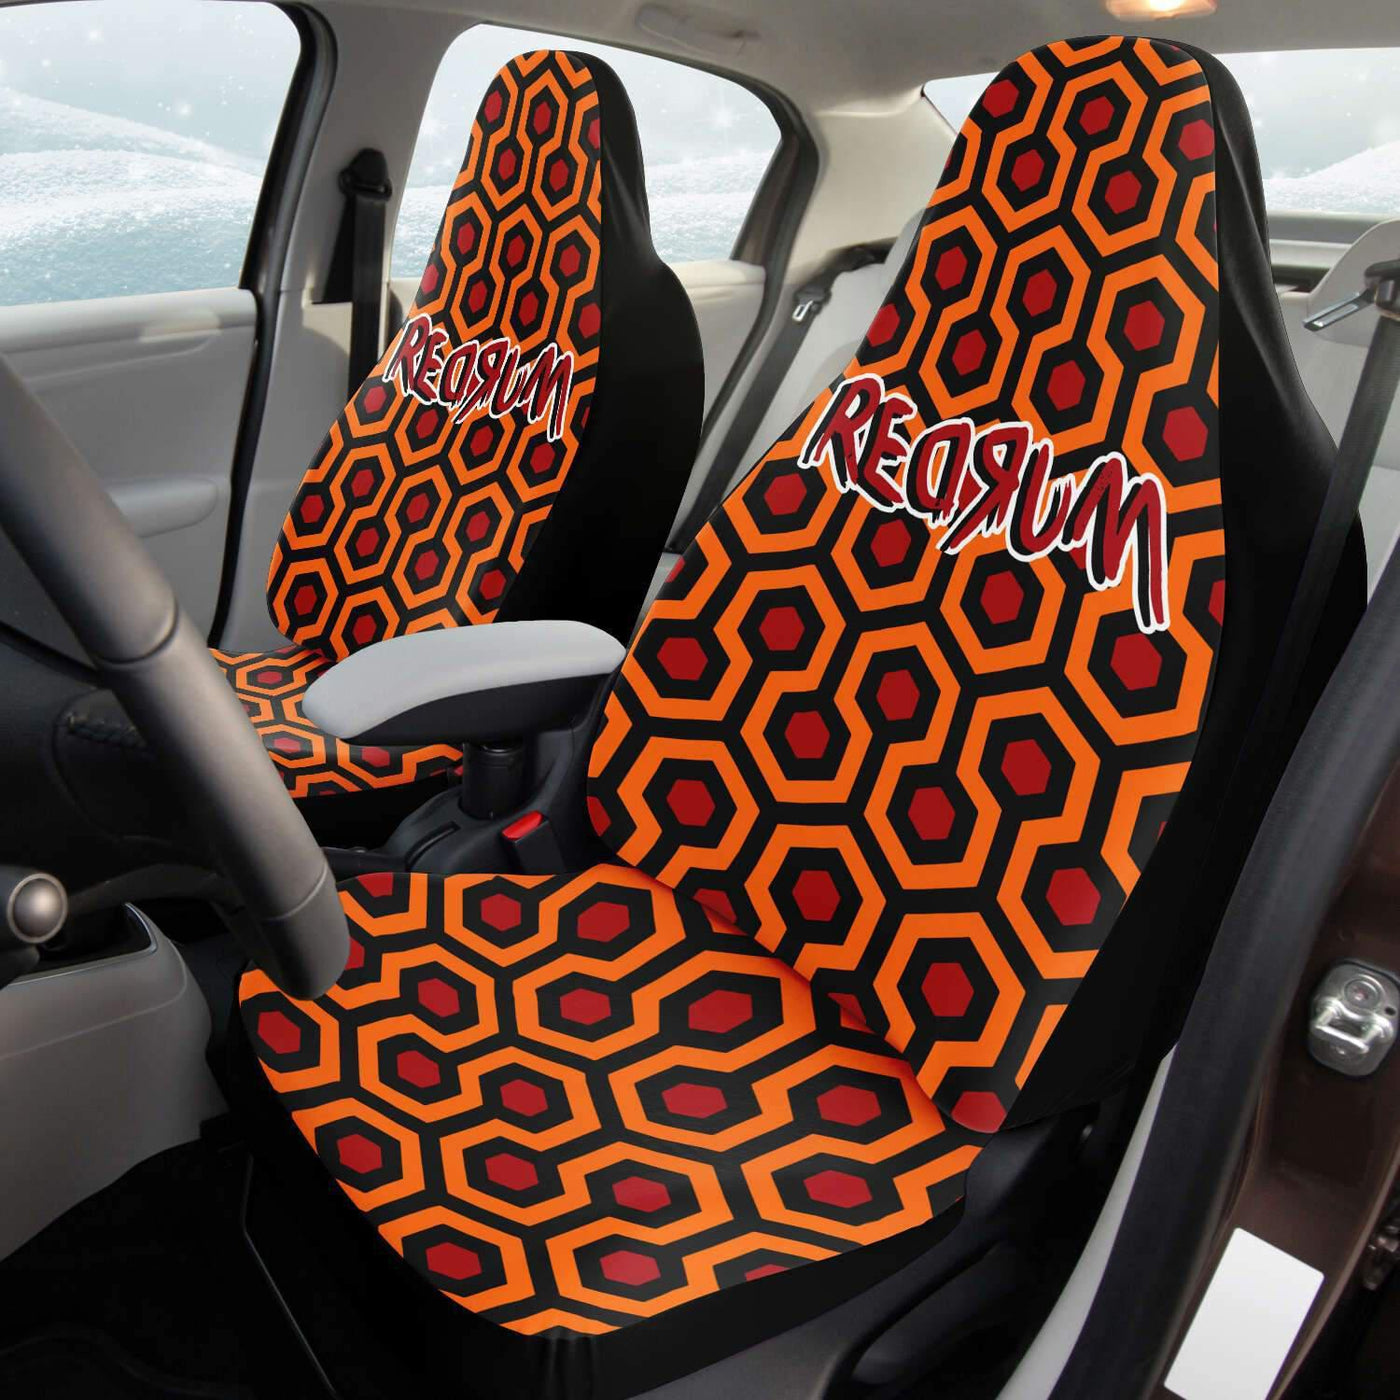 The Shining Car Seat Covers - Redrum 237 Overlook Hotel